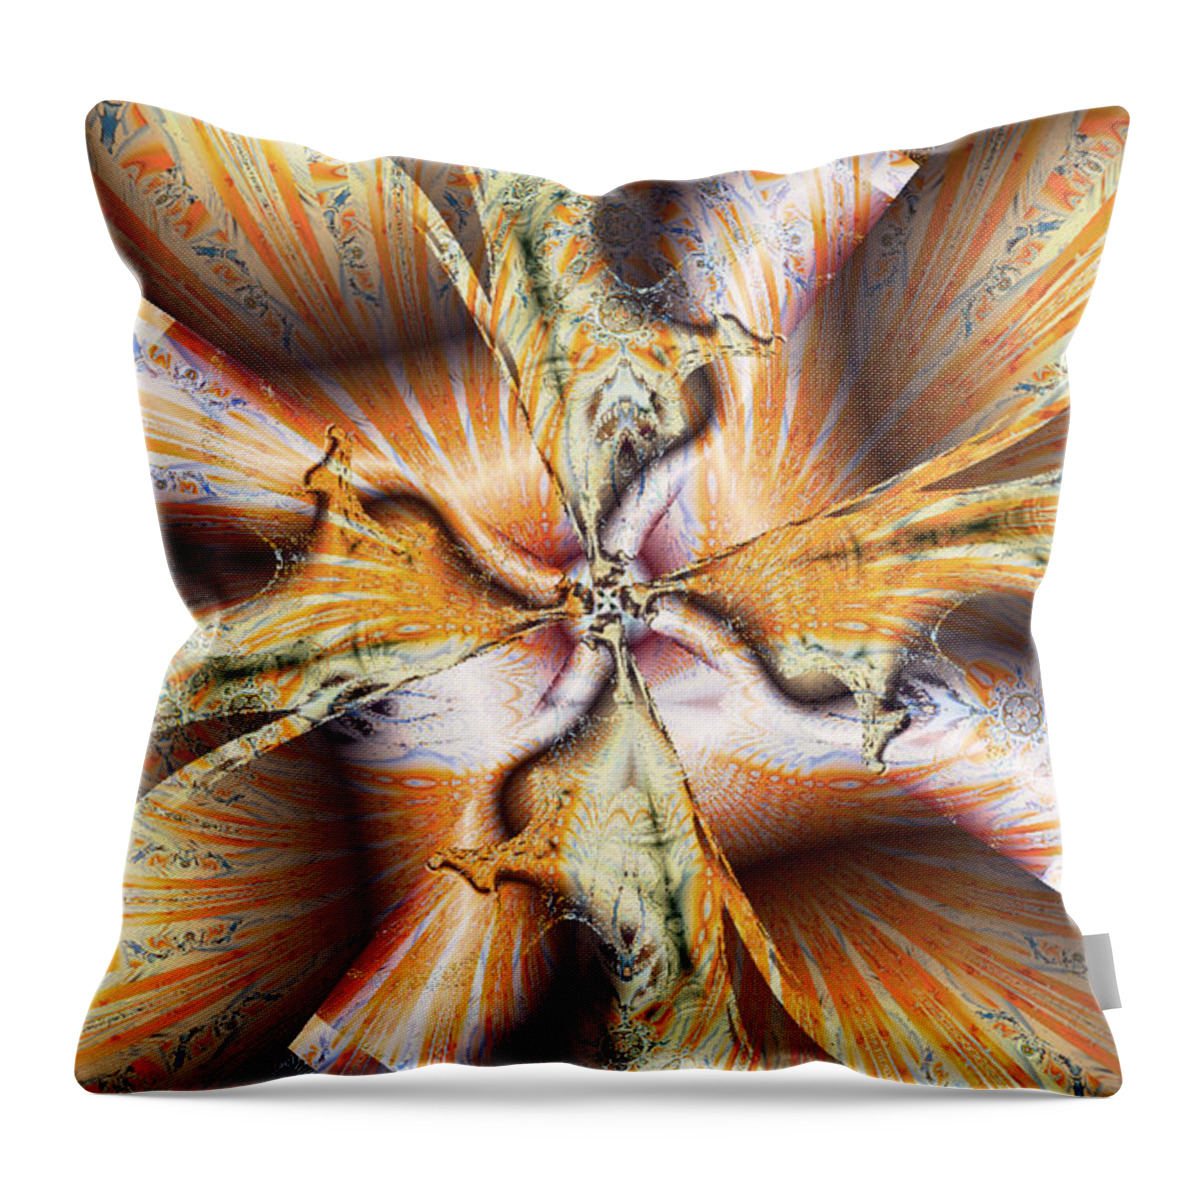 Abstract Throw Pillow featuring the digital art Toffee Pull #1 by Jim Pavelle